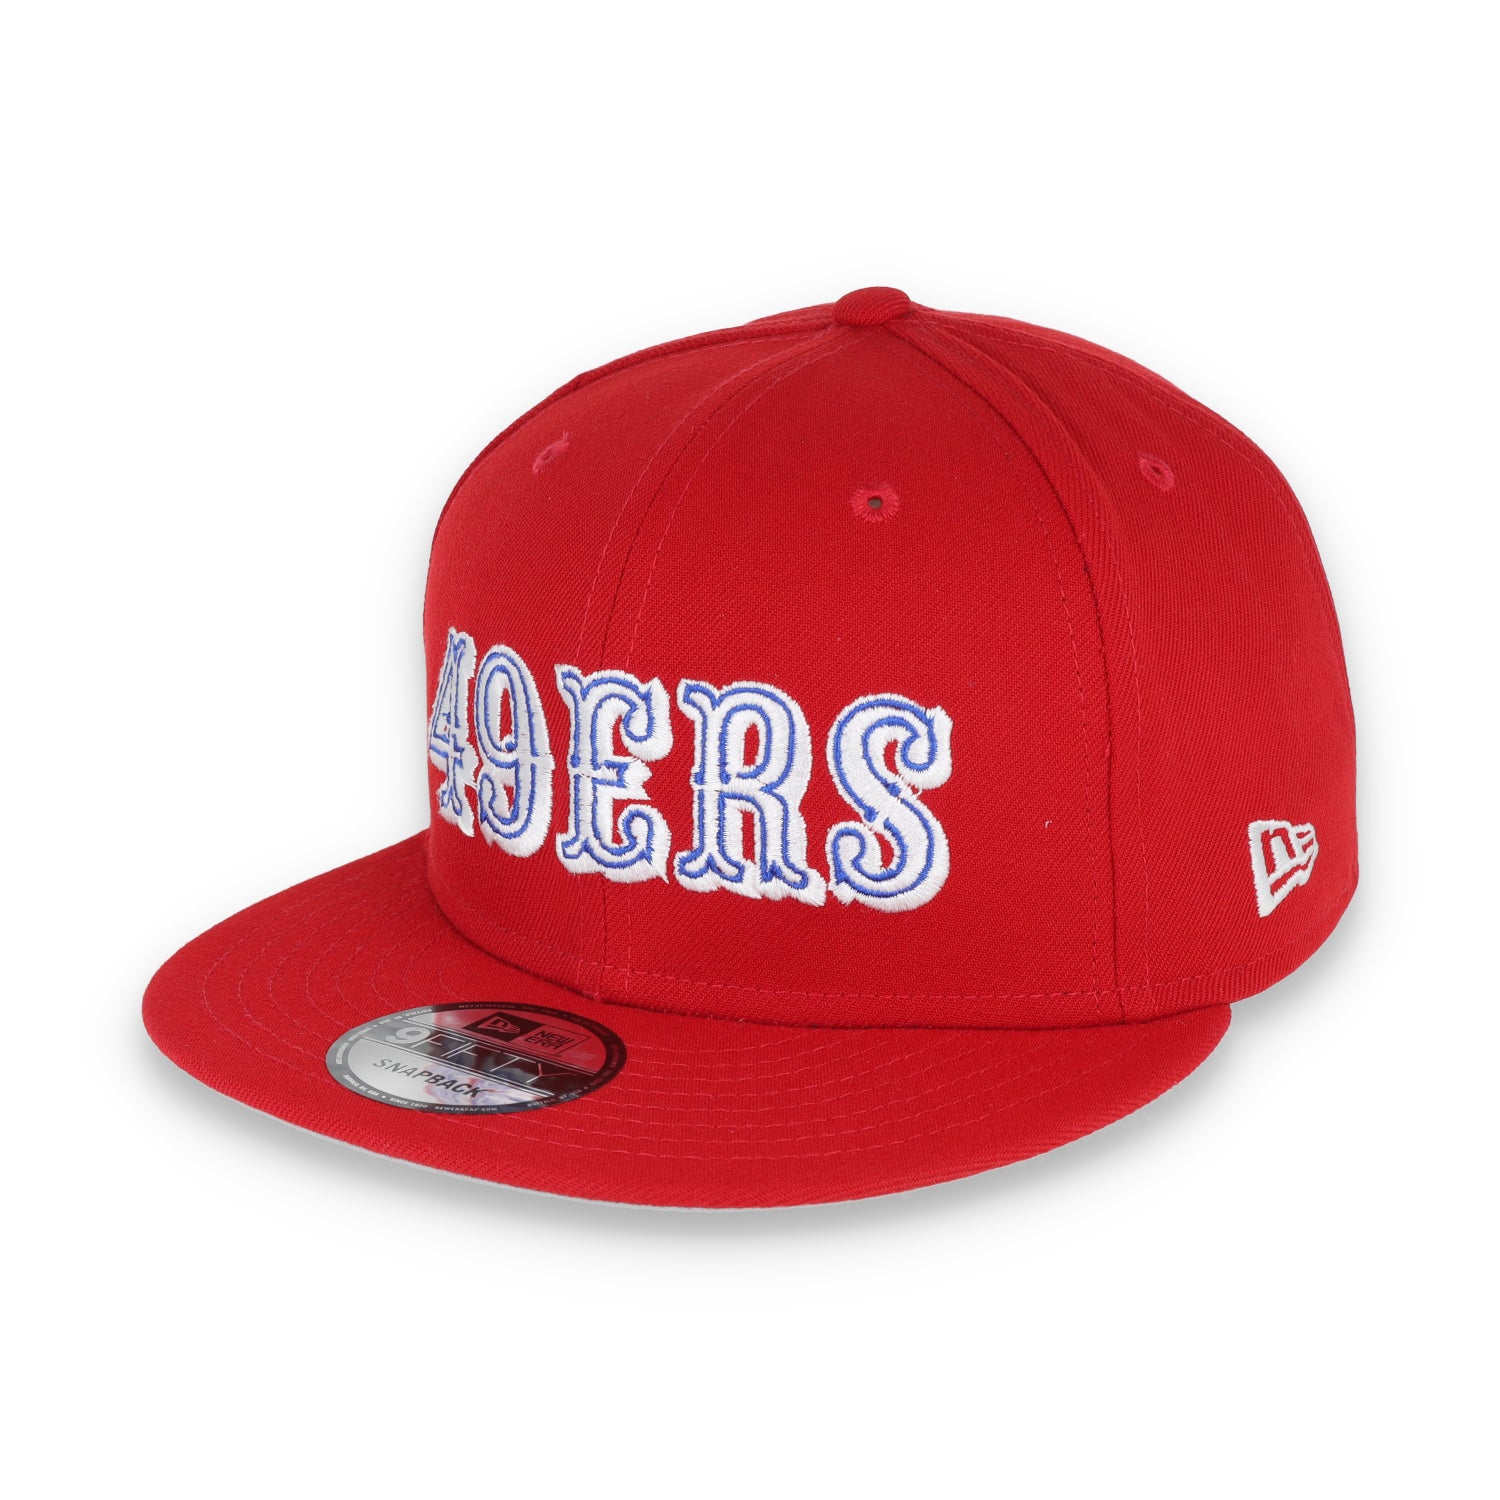 SAN FRANCISCO 49ERS 40TH ANNIVERSARY SIDE PATCH NEW ERA 9FIFTY SNAPBACK-RED